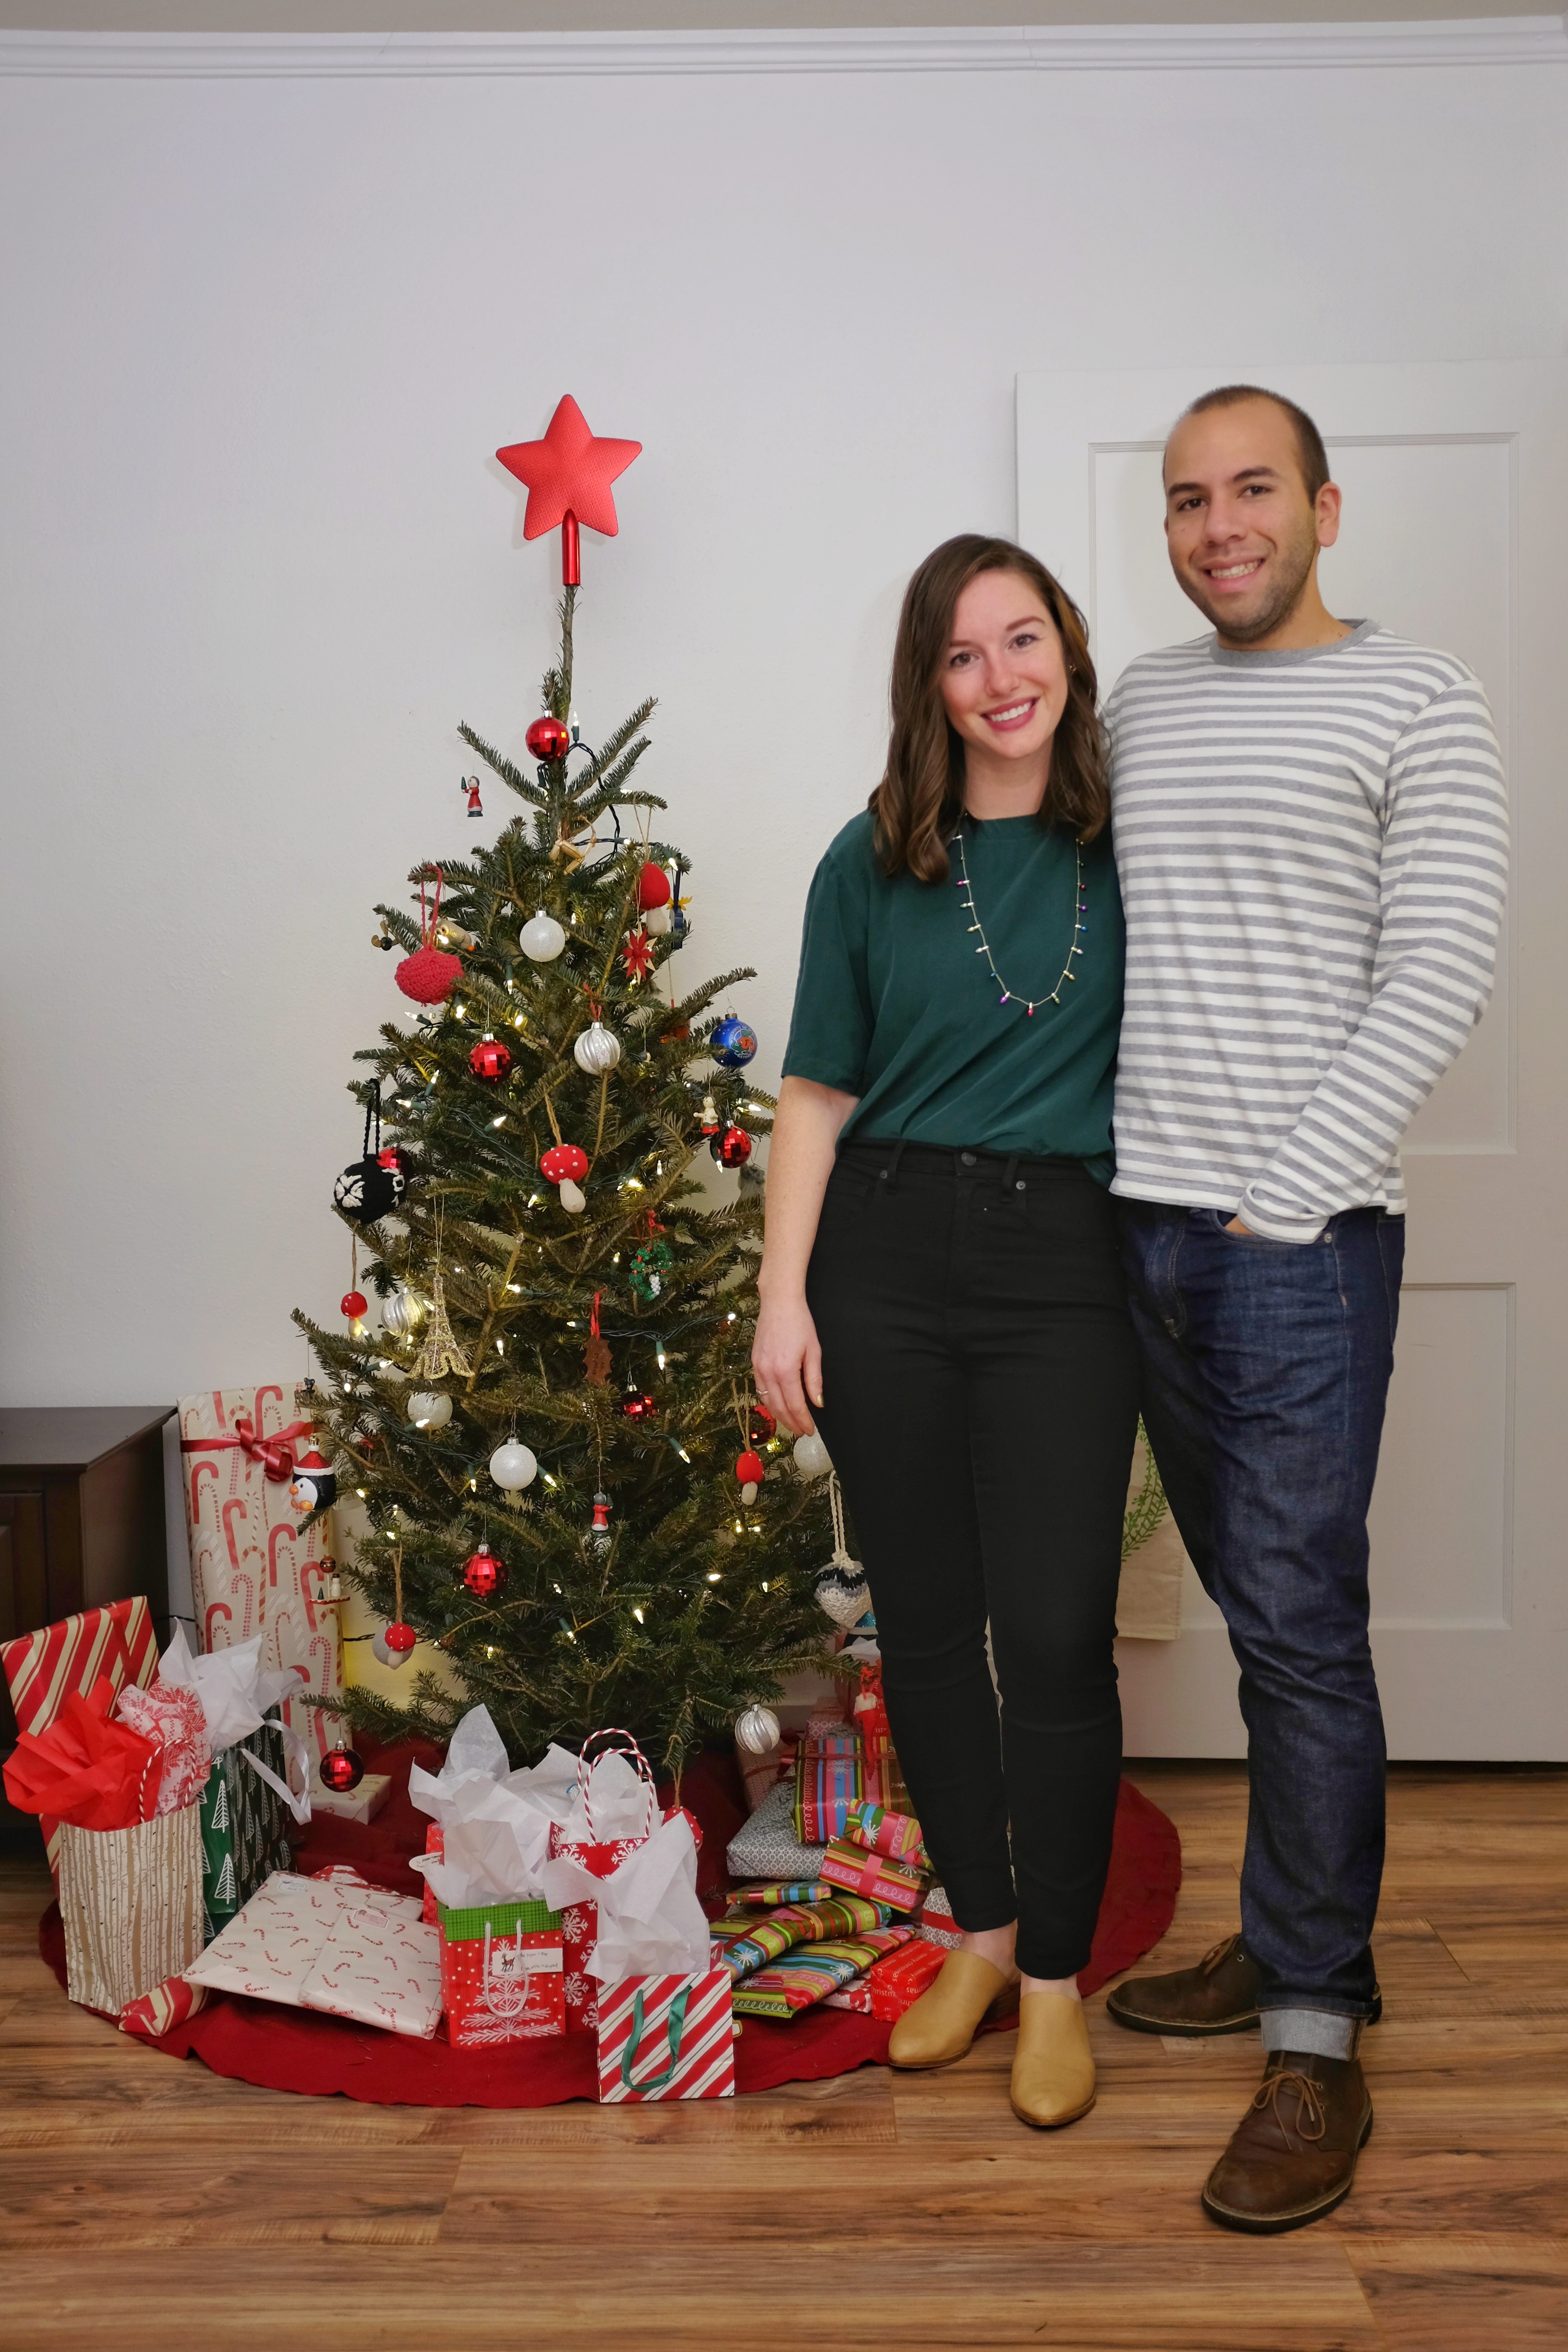 Alyssa and Michael take a photo in front of the Christmas tree